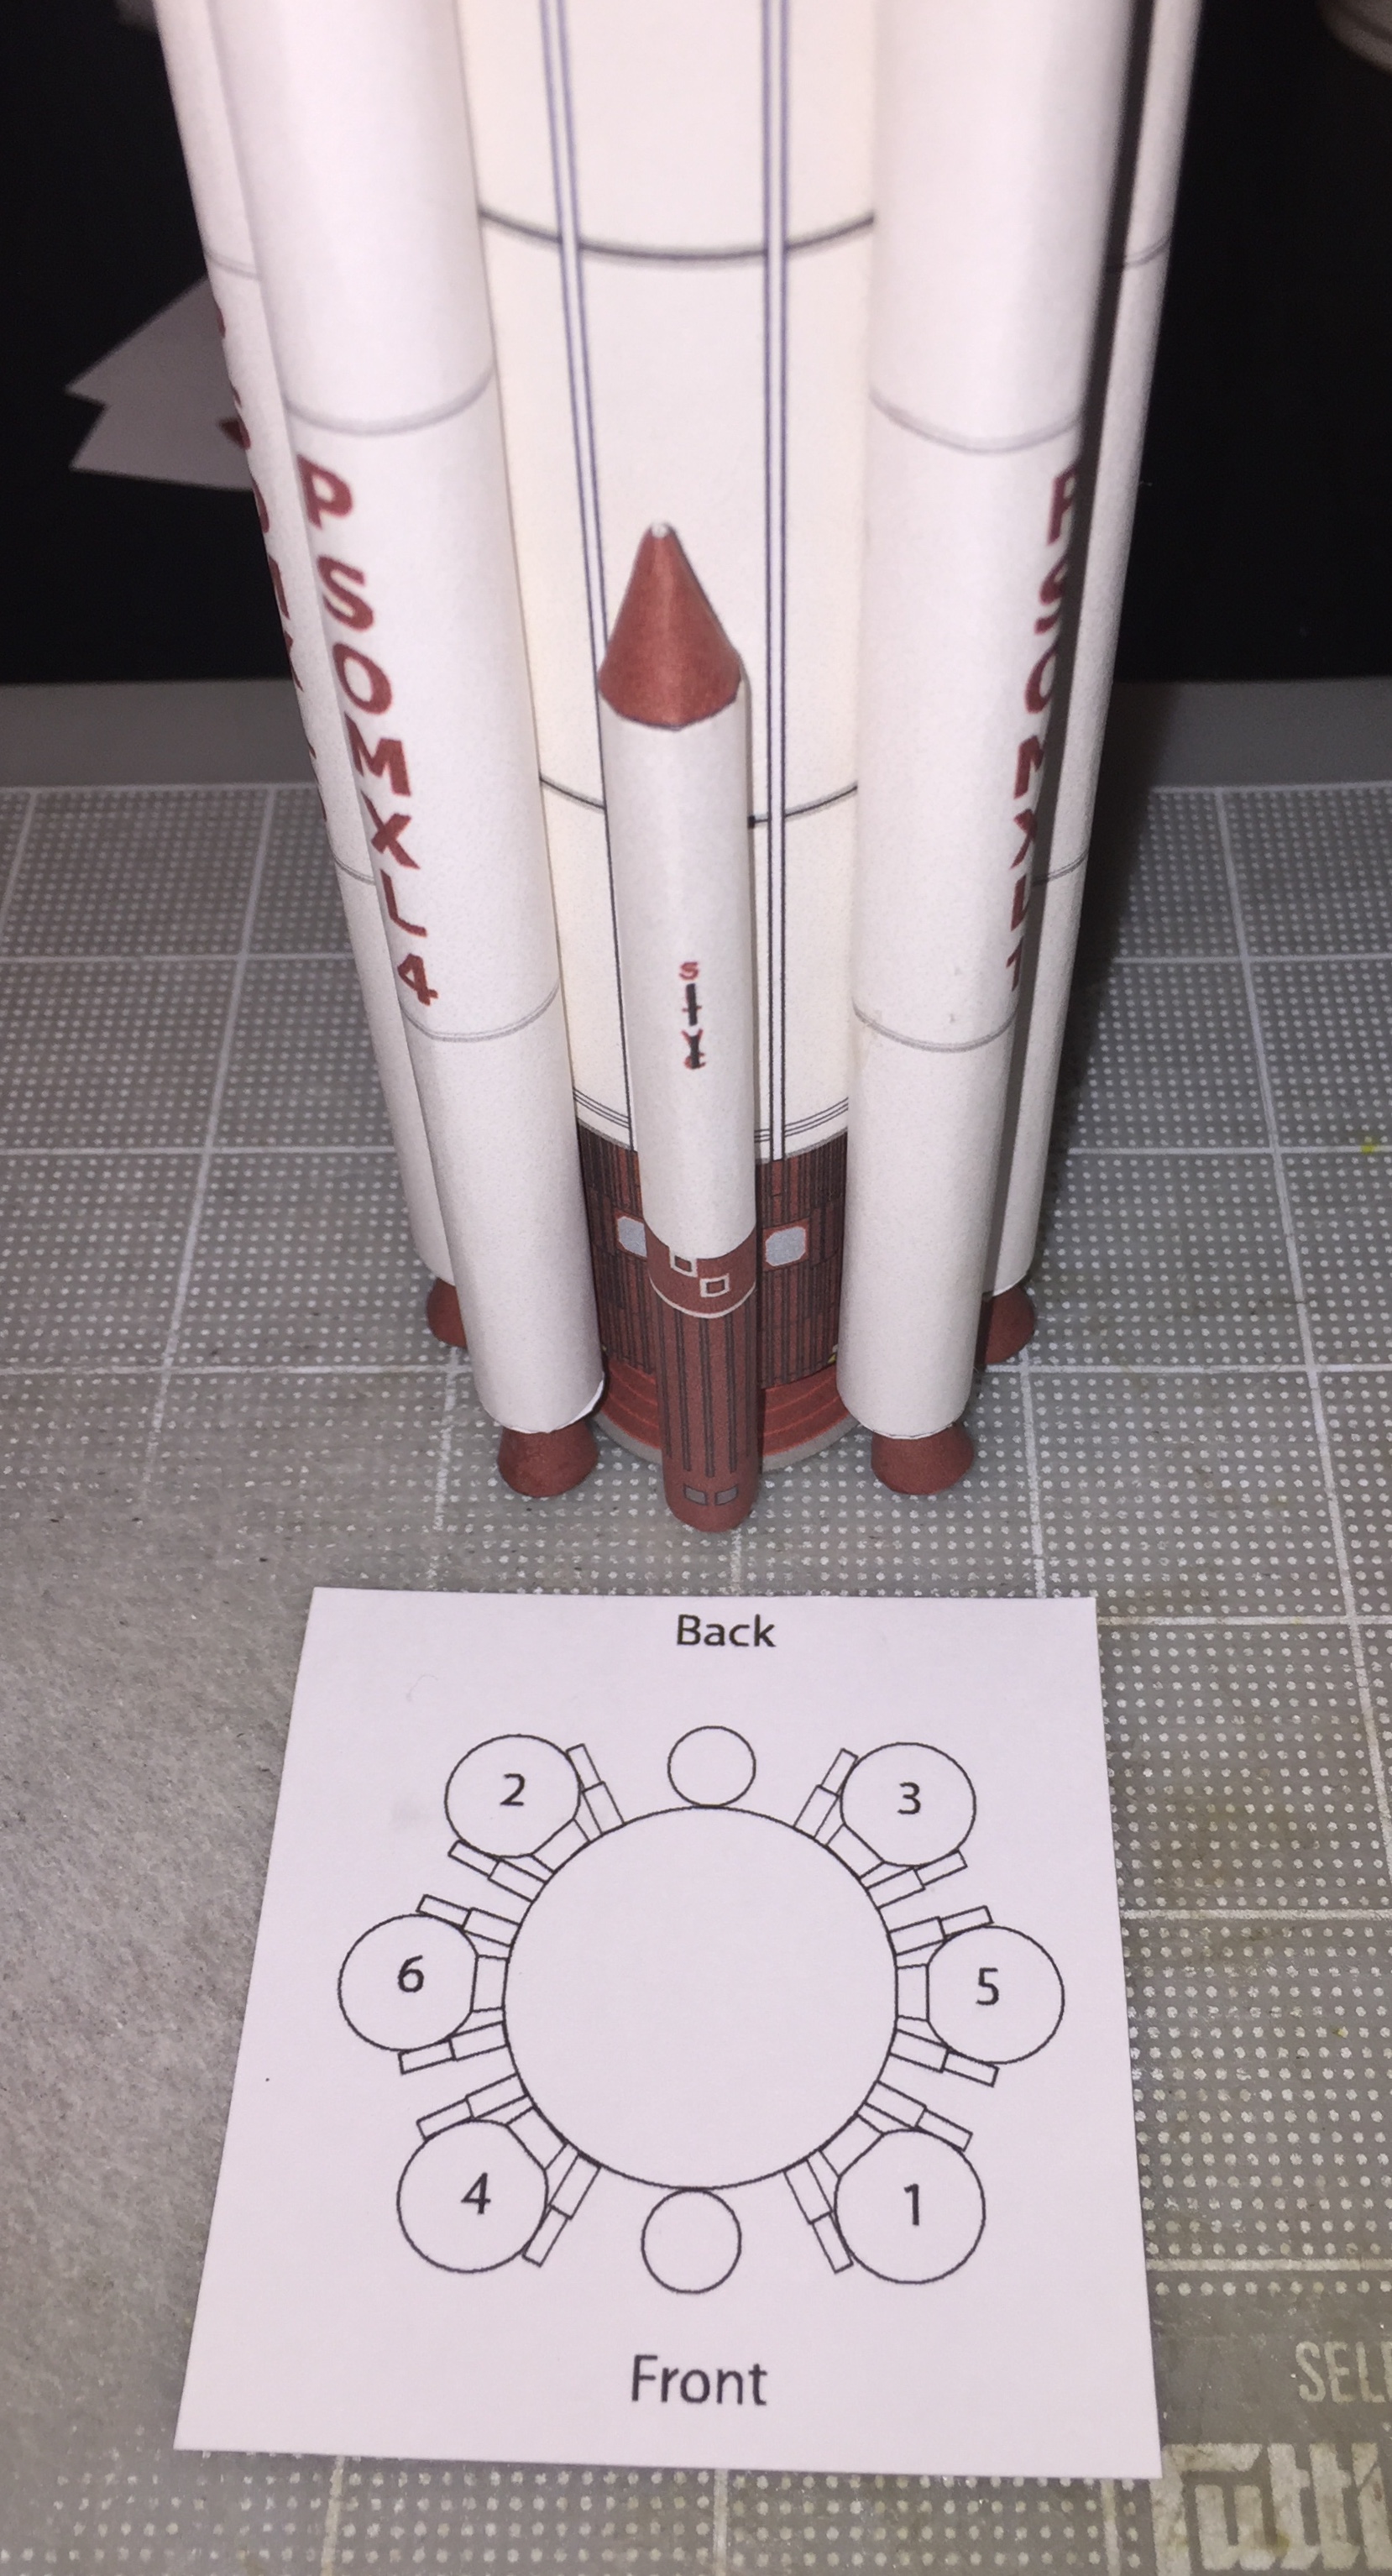 India’s PSLV rocket – AXM 1:96 version | AXM Paper Space Scale Models Blog